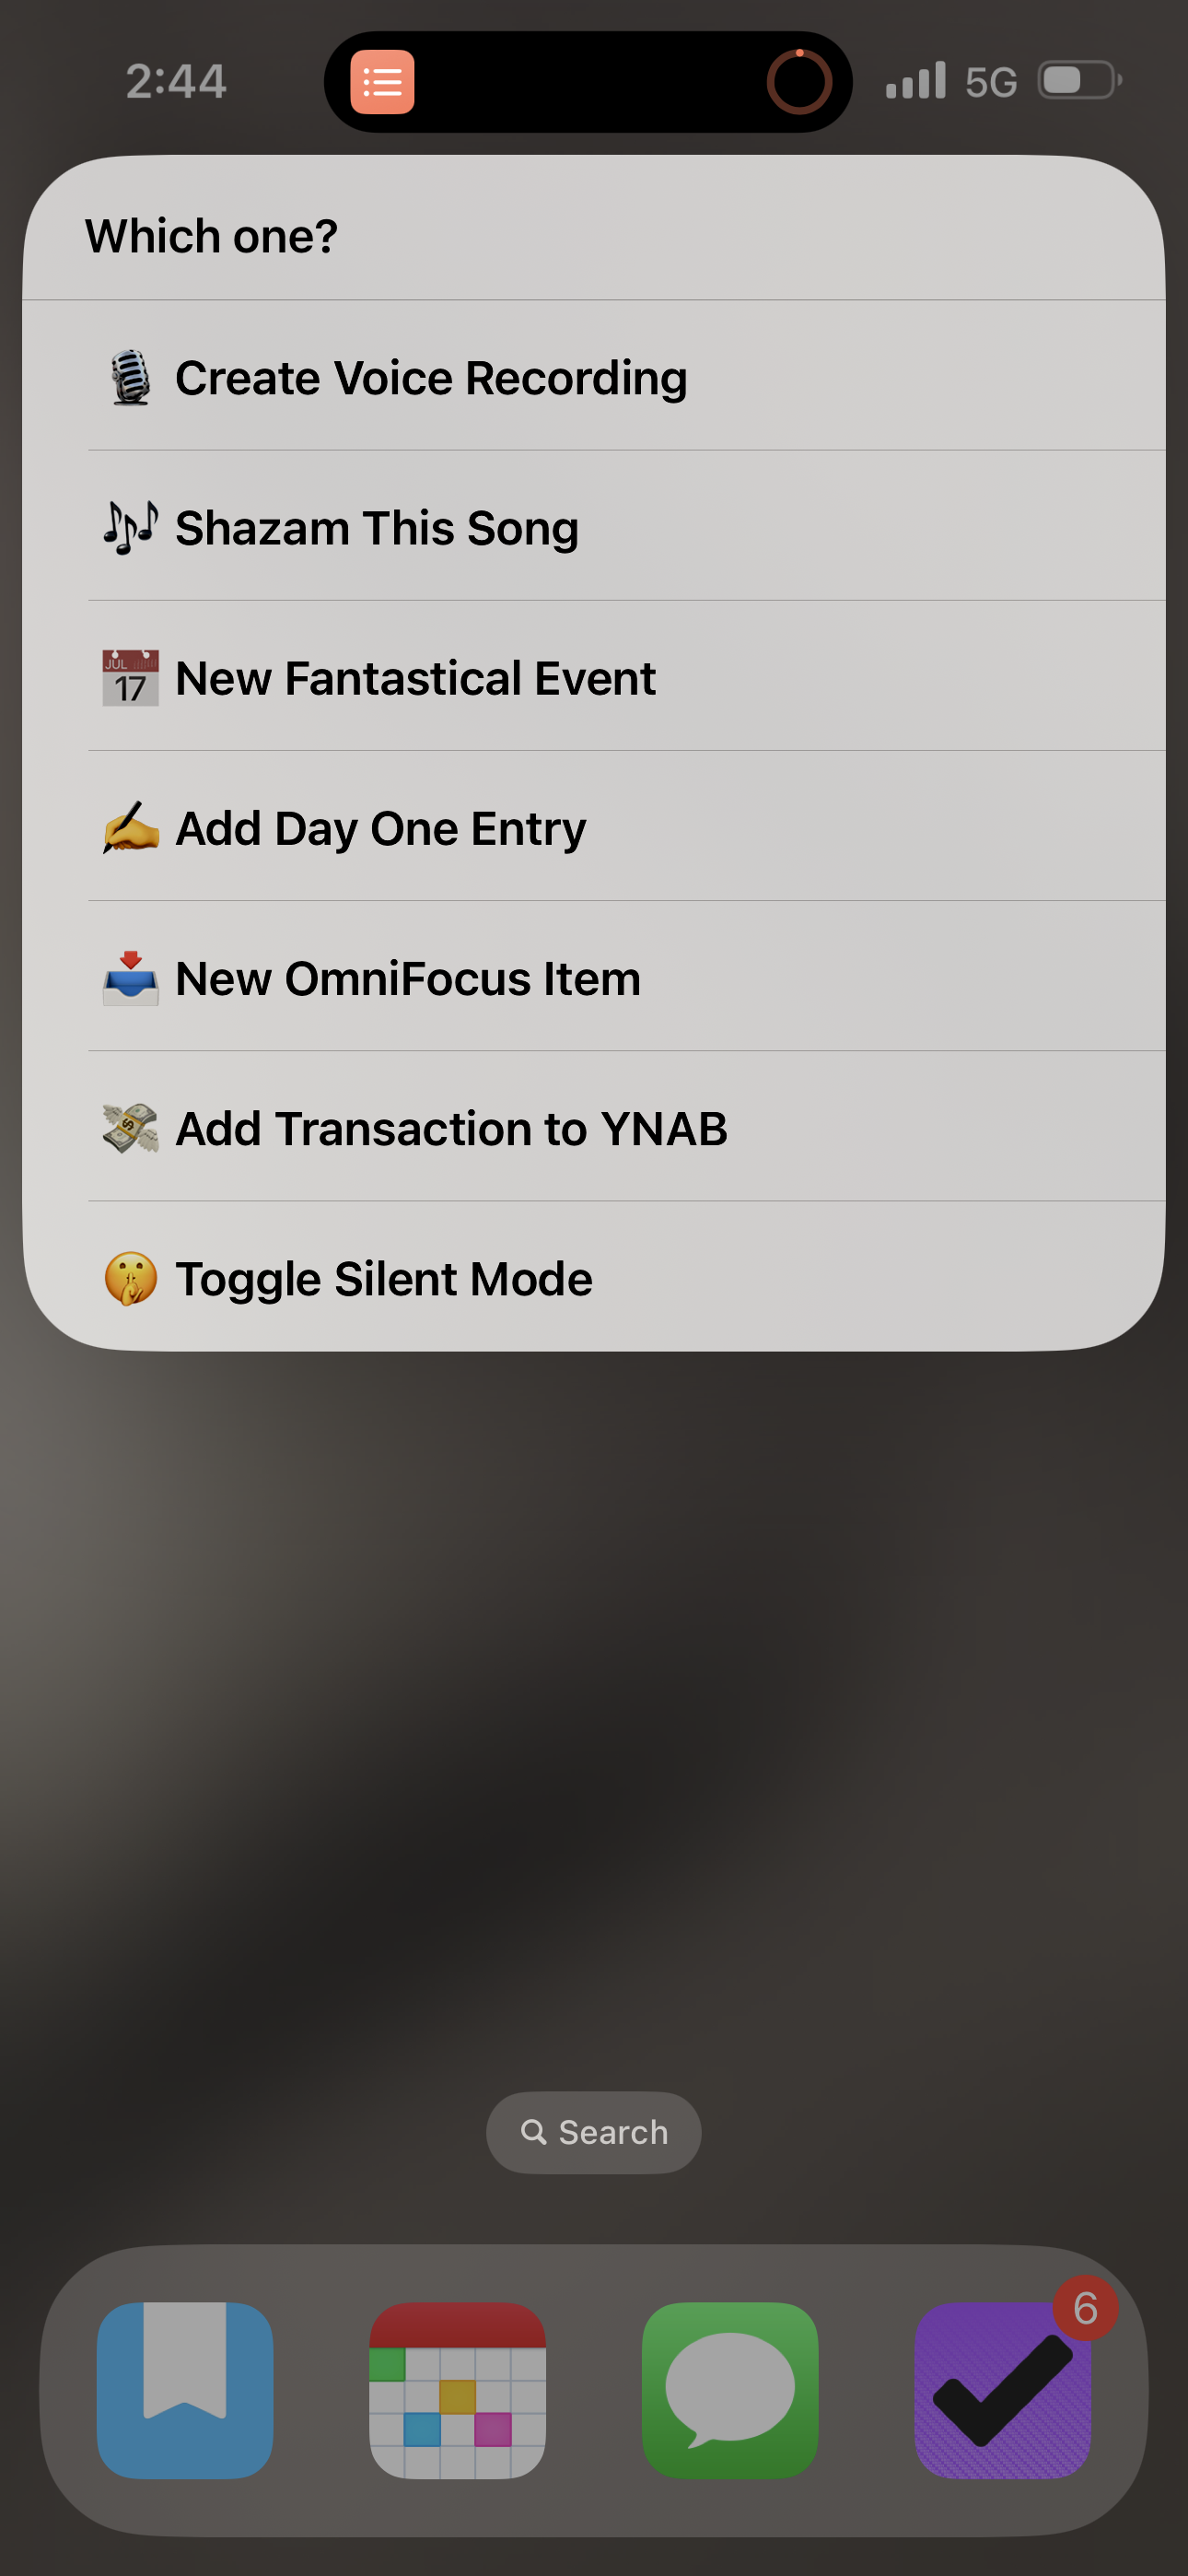 A screenshot of an iPhone Home Screen showing a menu of shortcuts to run, including creating a voice recording, Shazam, and creating an entry in OmniFocus, Fantastical, Day One, or YNAB, or toggling Silent Mode.